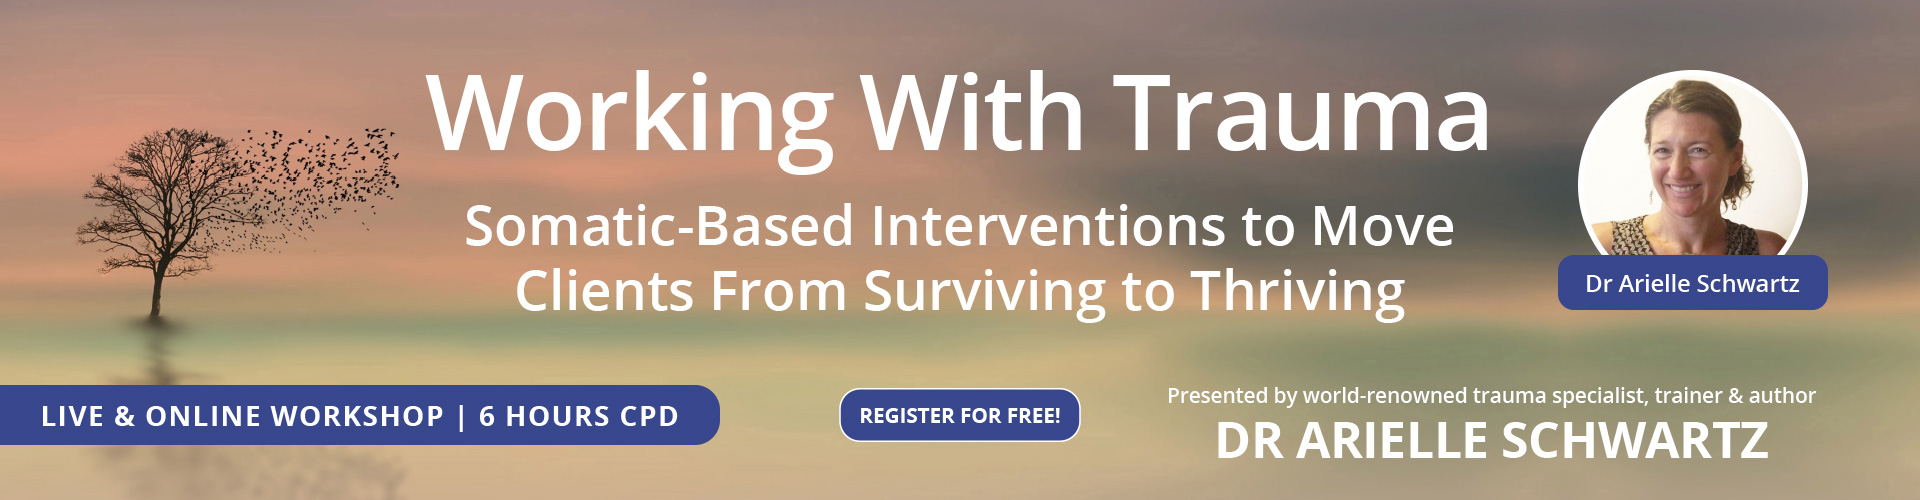 Working with trauma: Somatic-based interventions to move clients from surviving to thriving